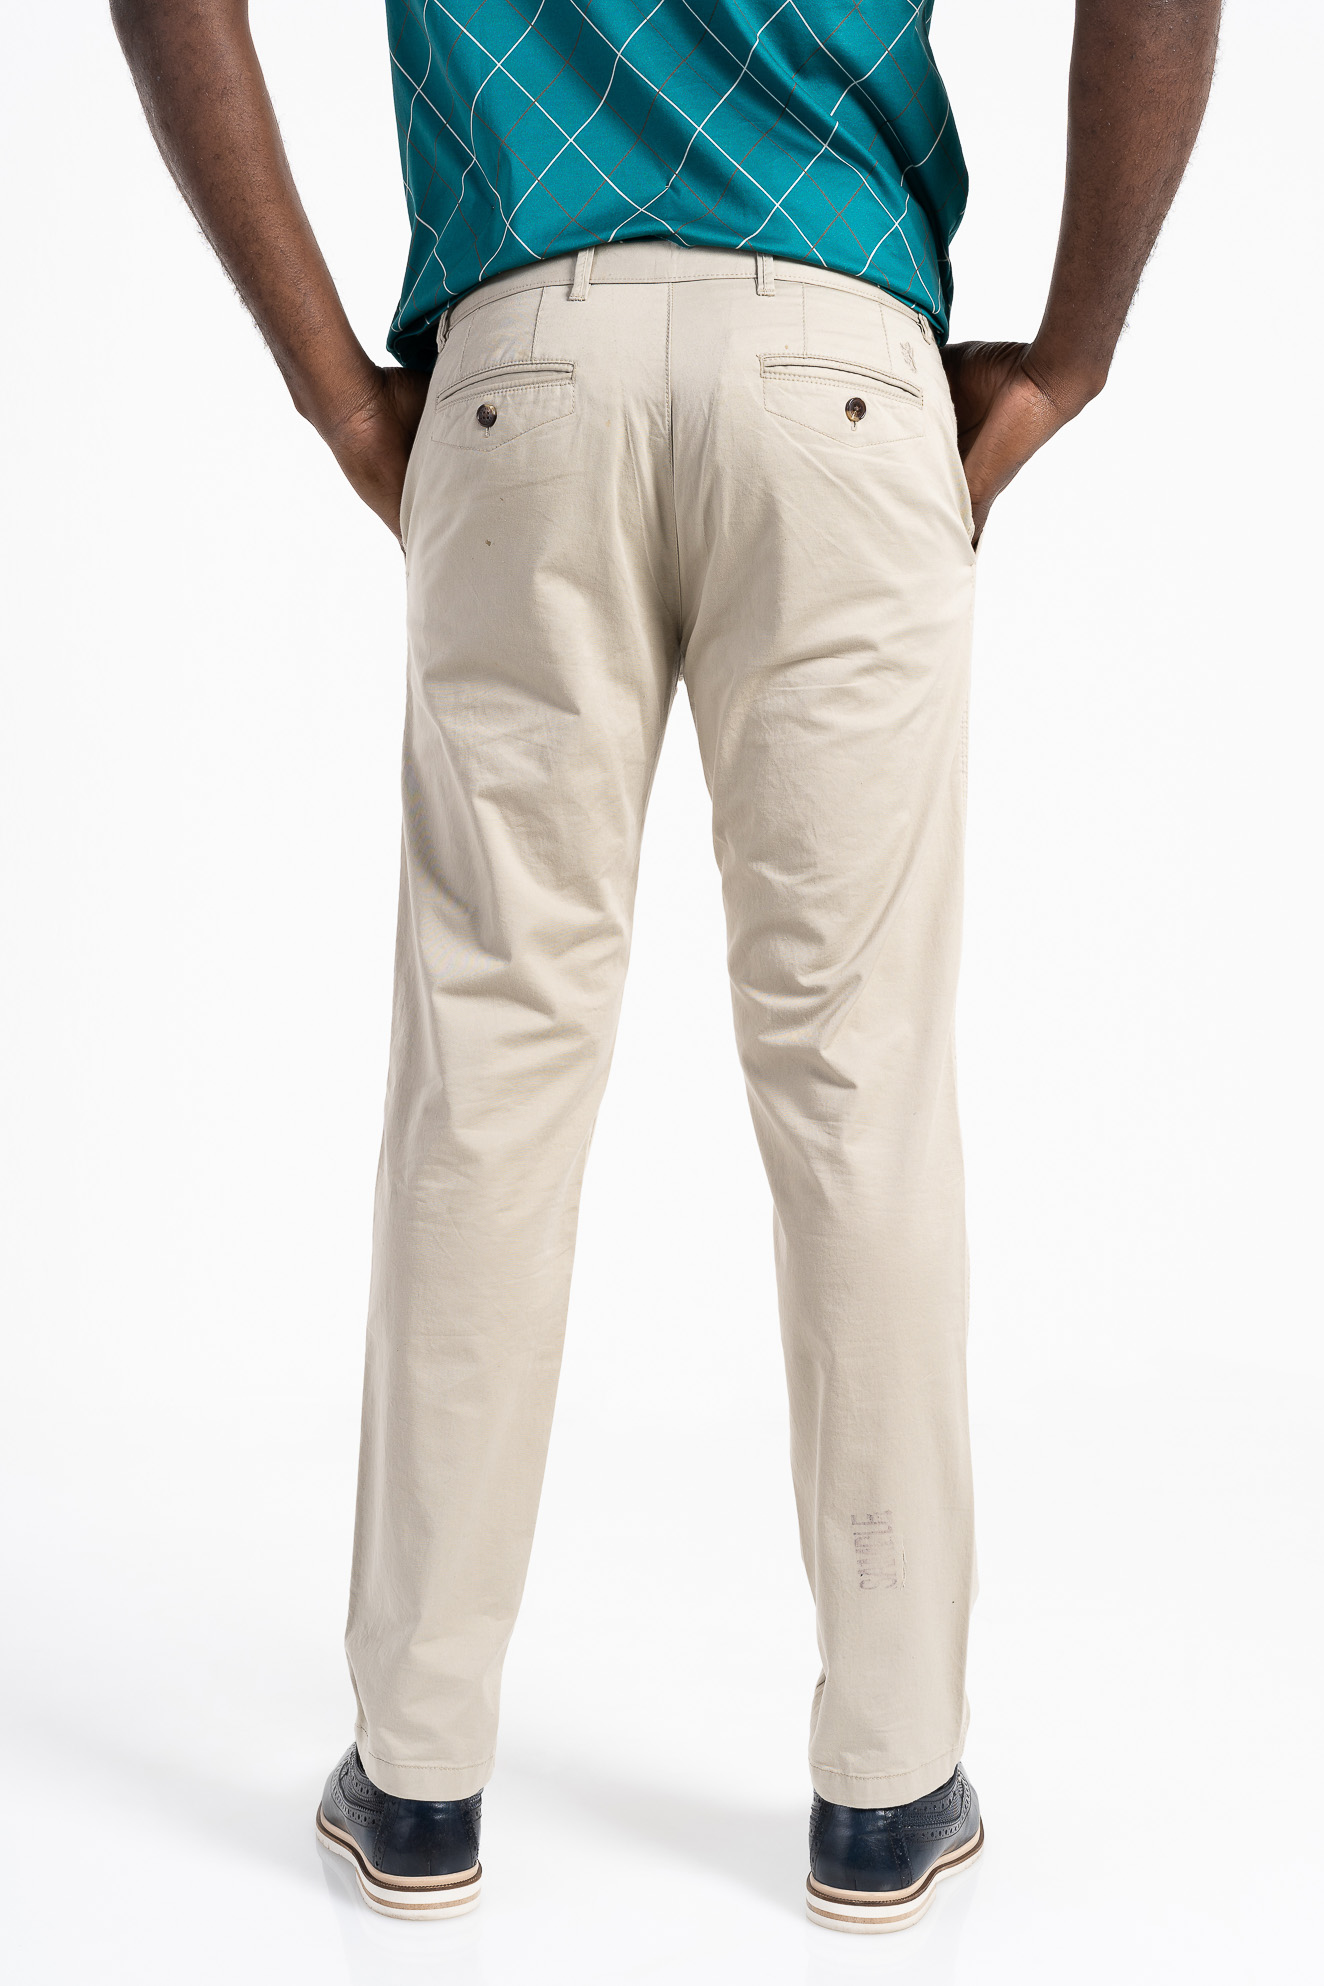 Pringle Jorge tailored fit chino’s men’s - Frontierco